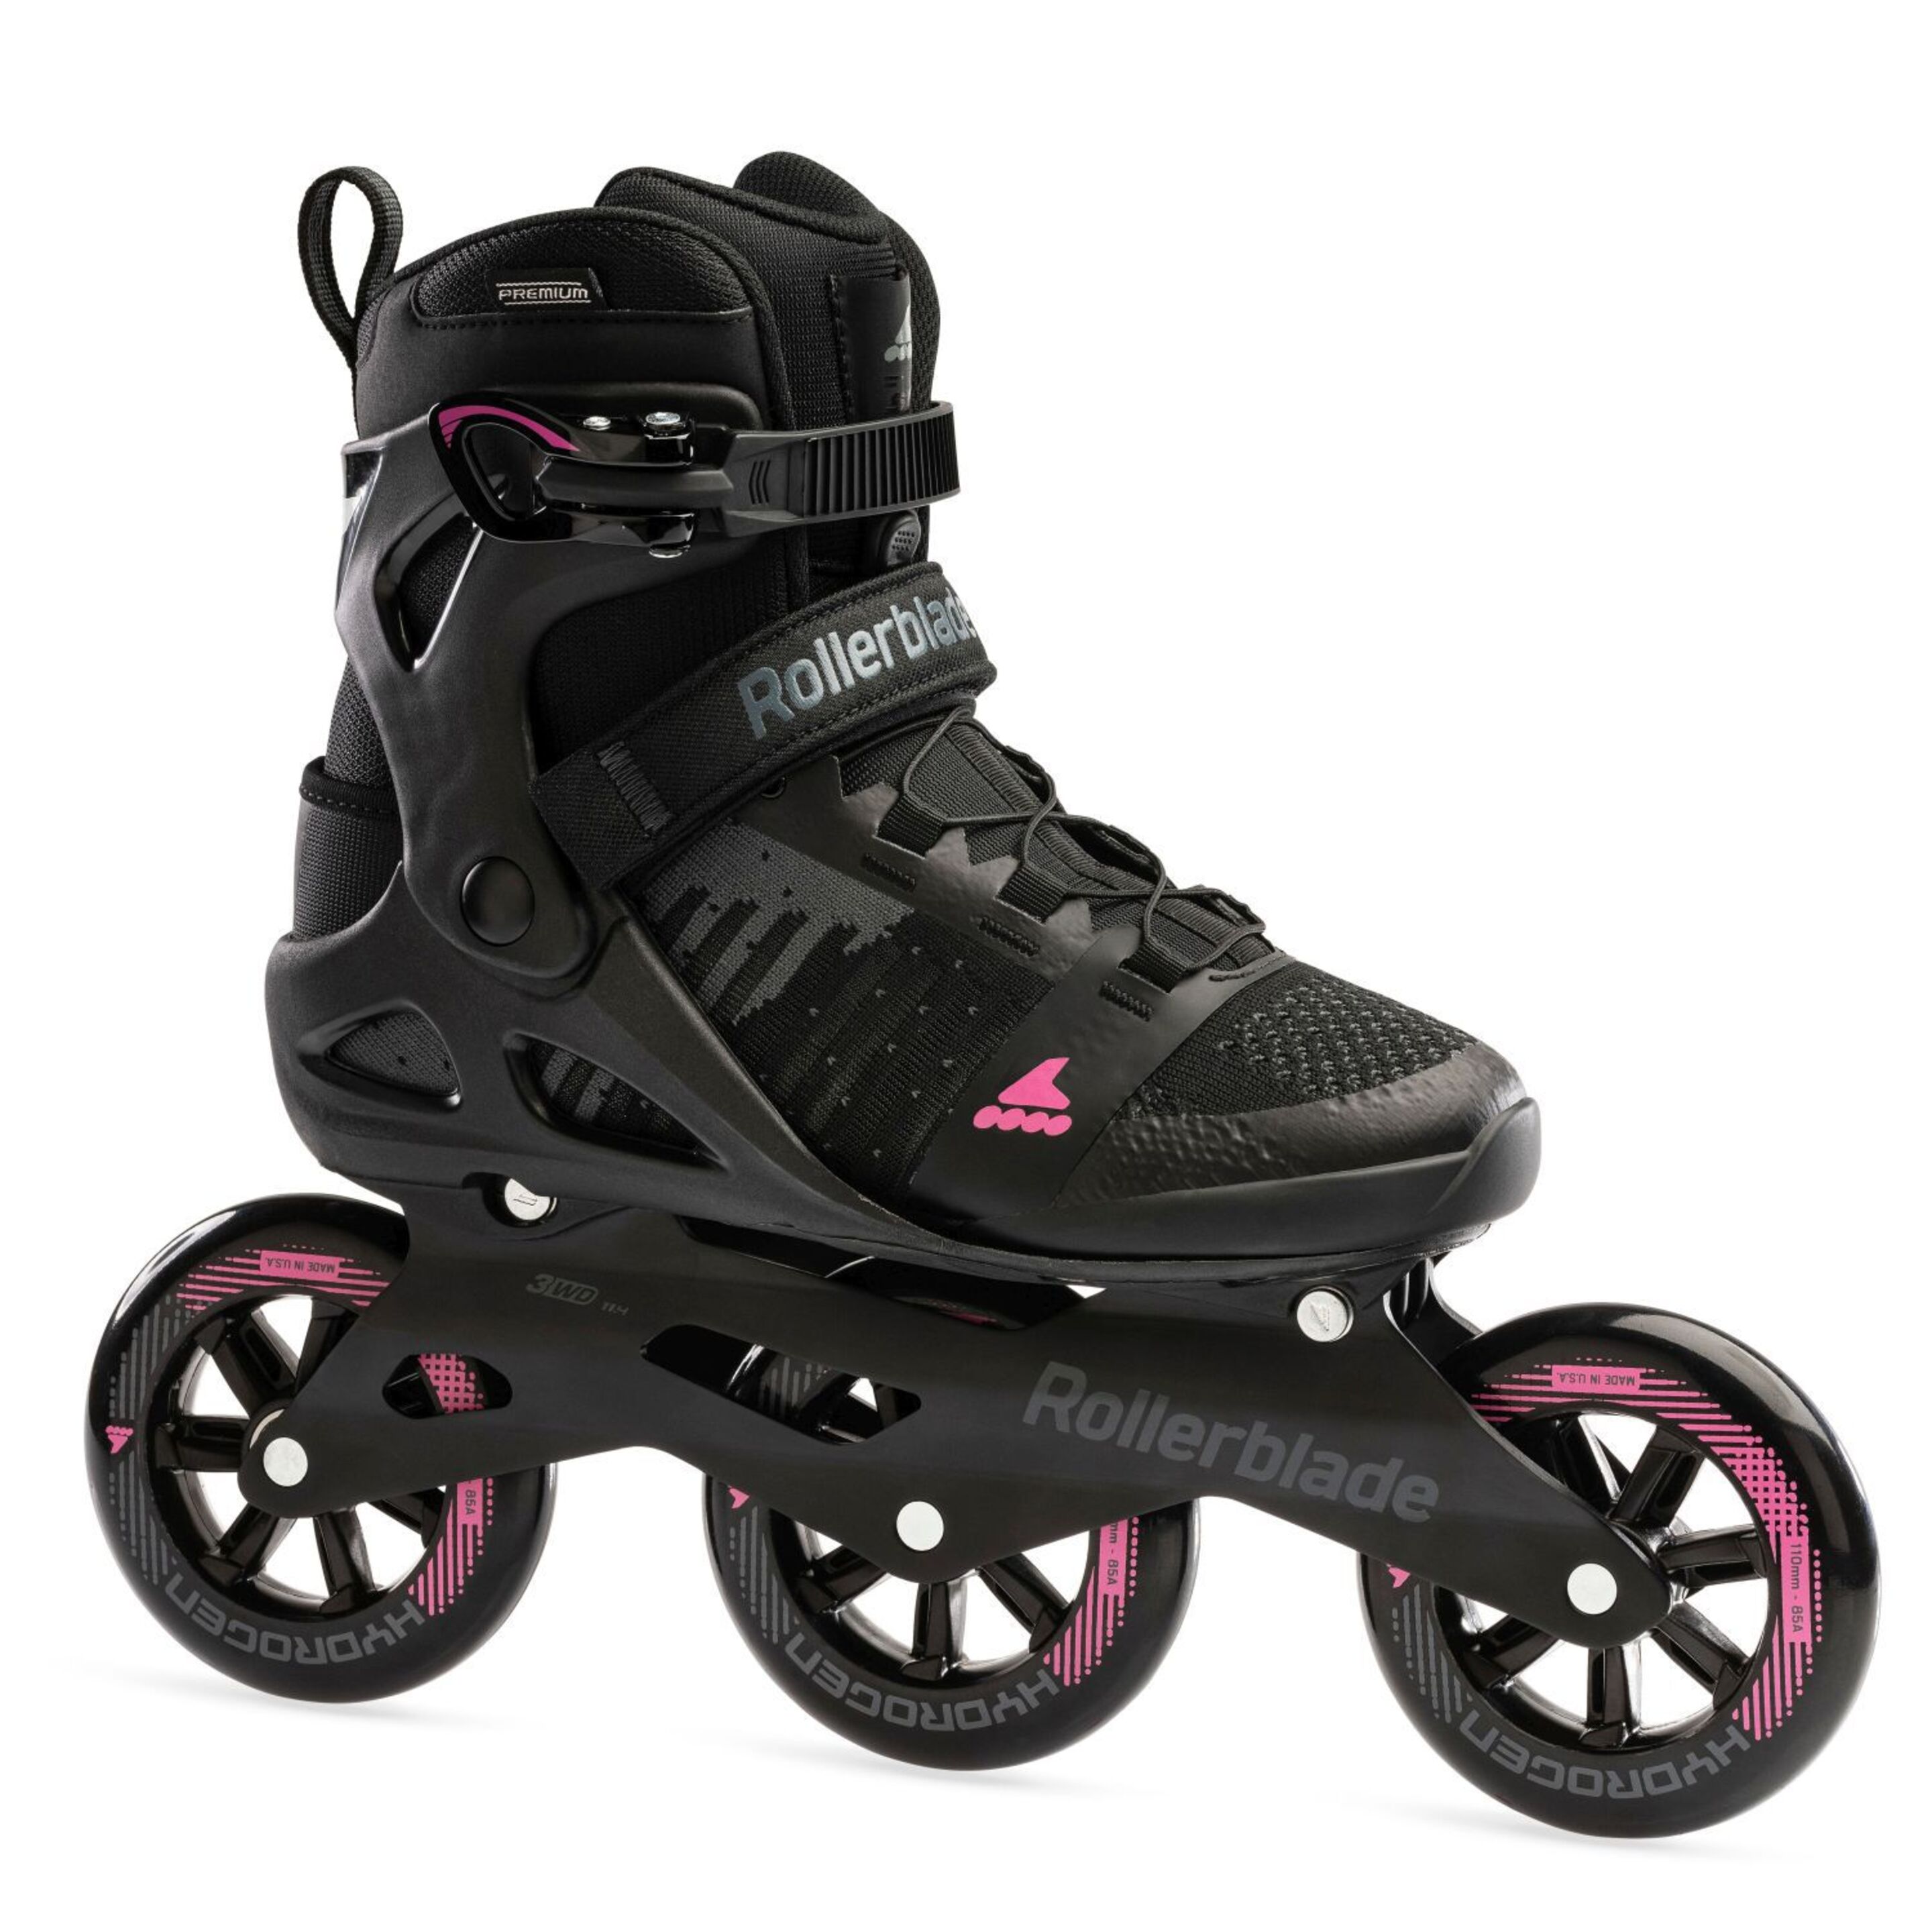 Patines Macroblade 110 3wd W Rollerblade - negro-rosa - 